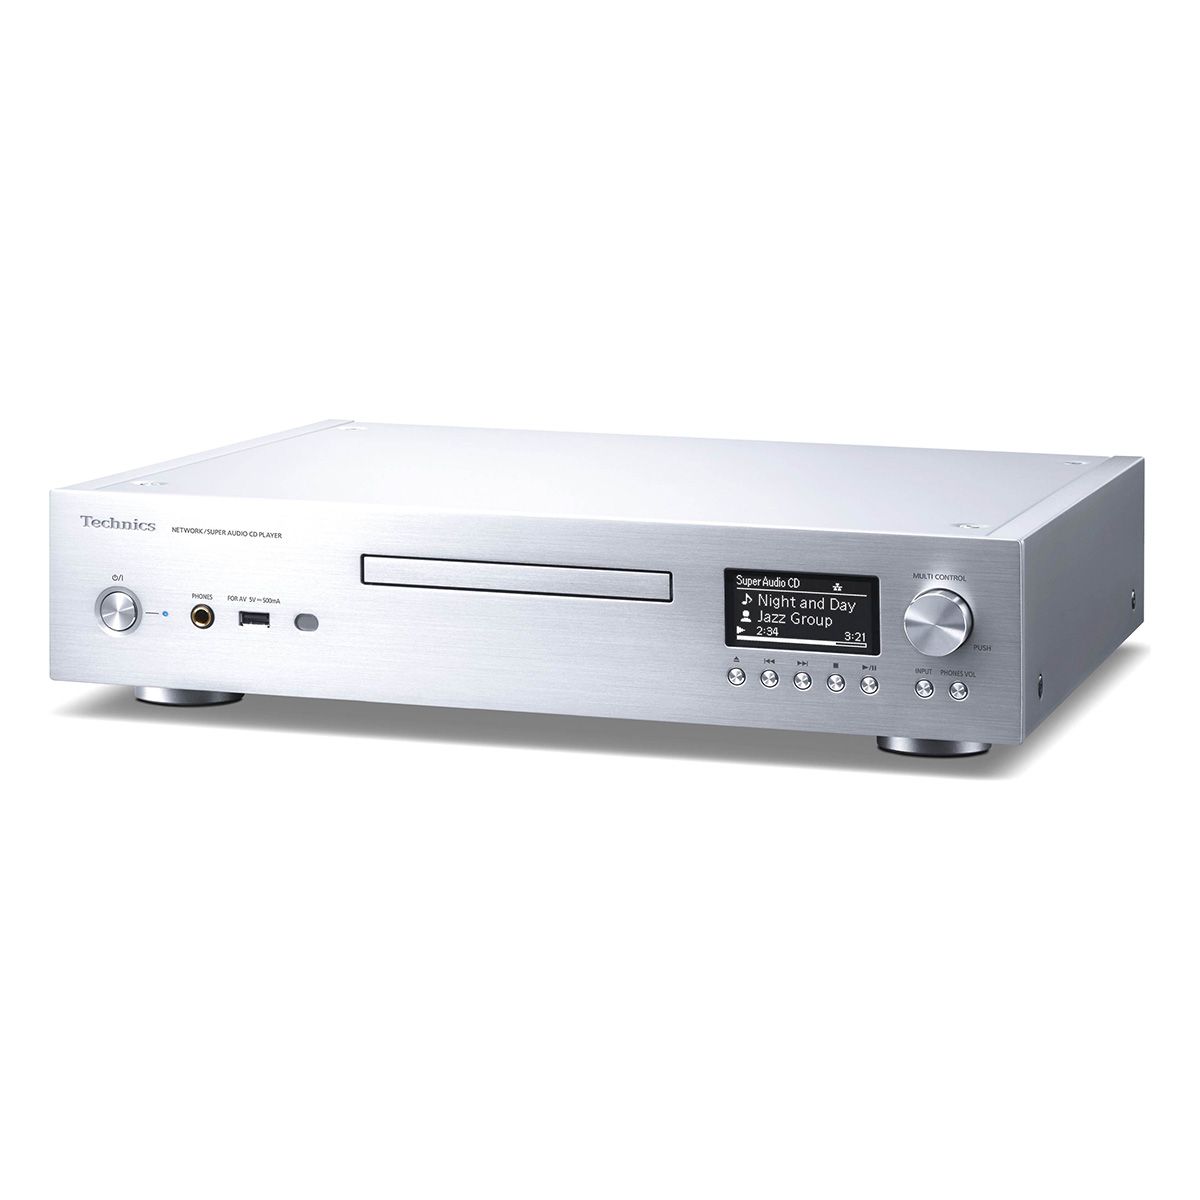 Technics SL-G700M2 CD SACD Network Player & DAC - Silver - angled front view